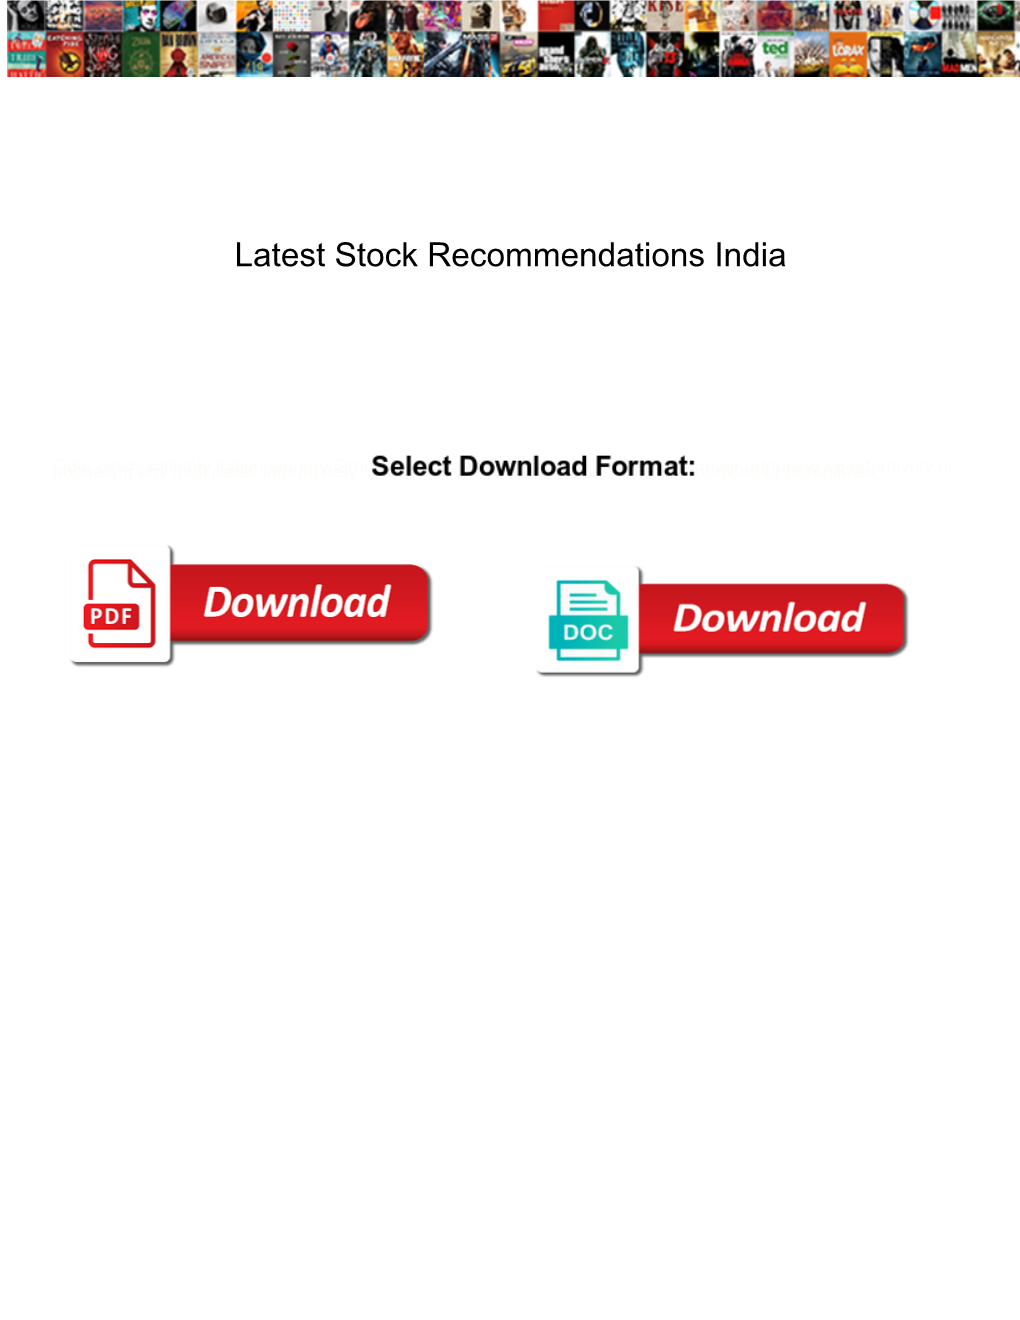 Latest Stock Recommendations India